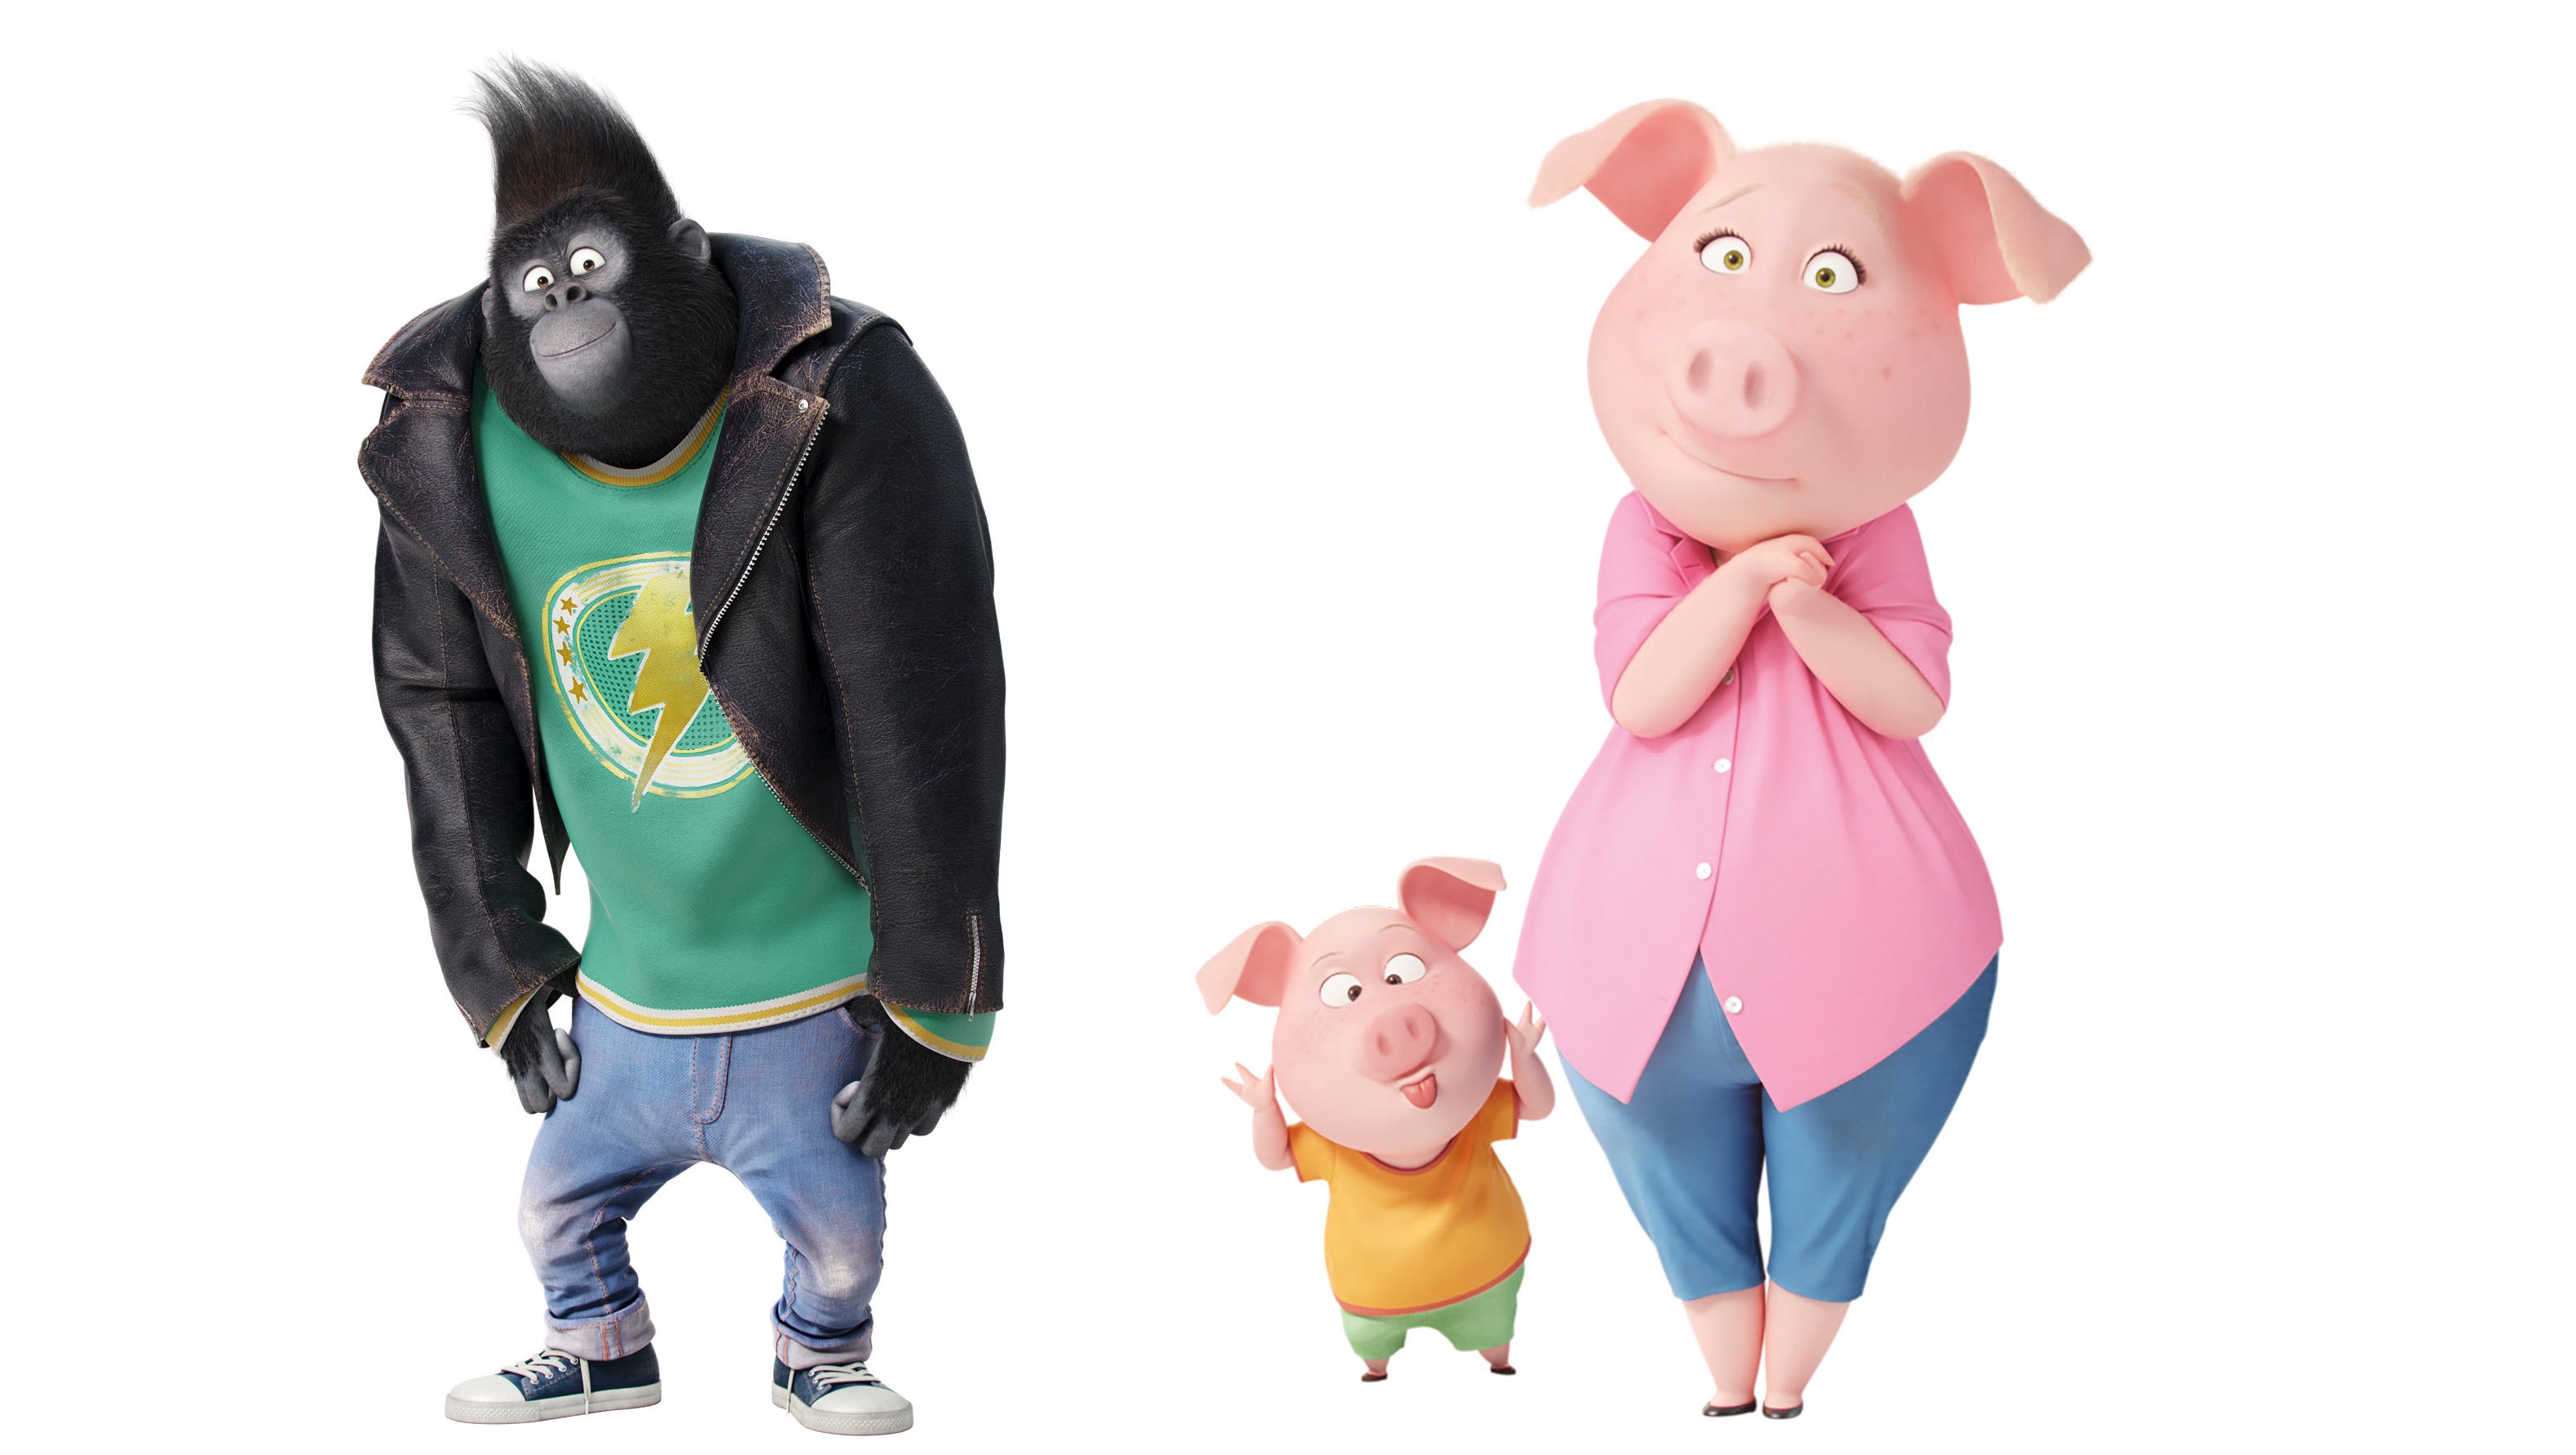 Johnny the gorilla (voiced by Taron Egerton) prefers to be a singer than a gangster, and Rosita (Reese Witherspoon) aspires to be a doting mother pig.